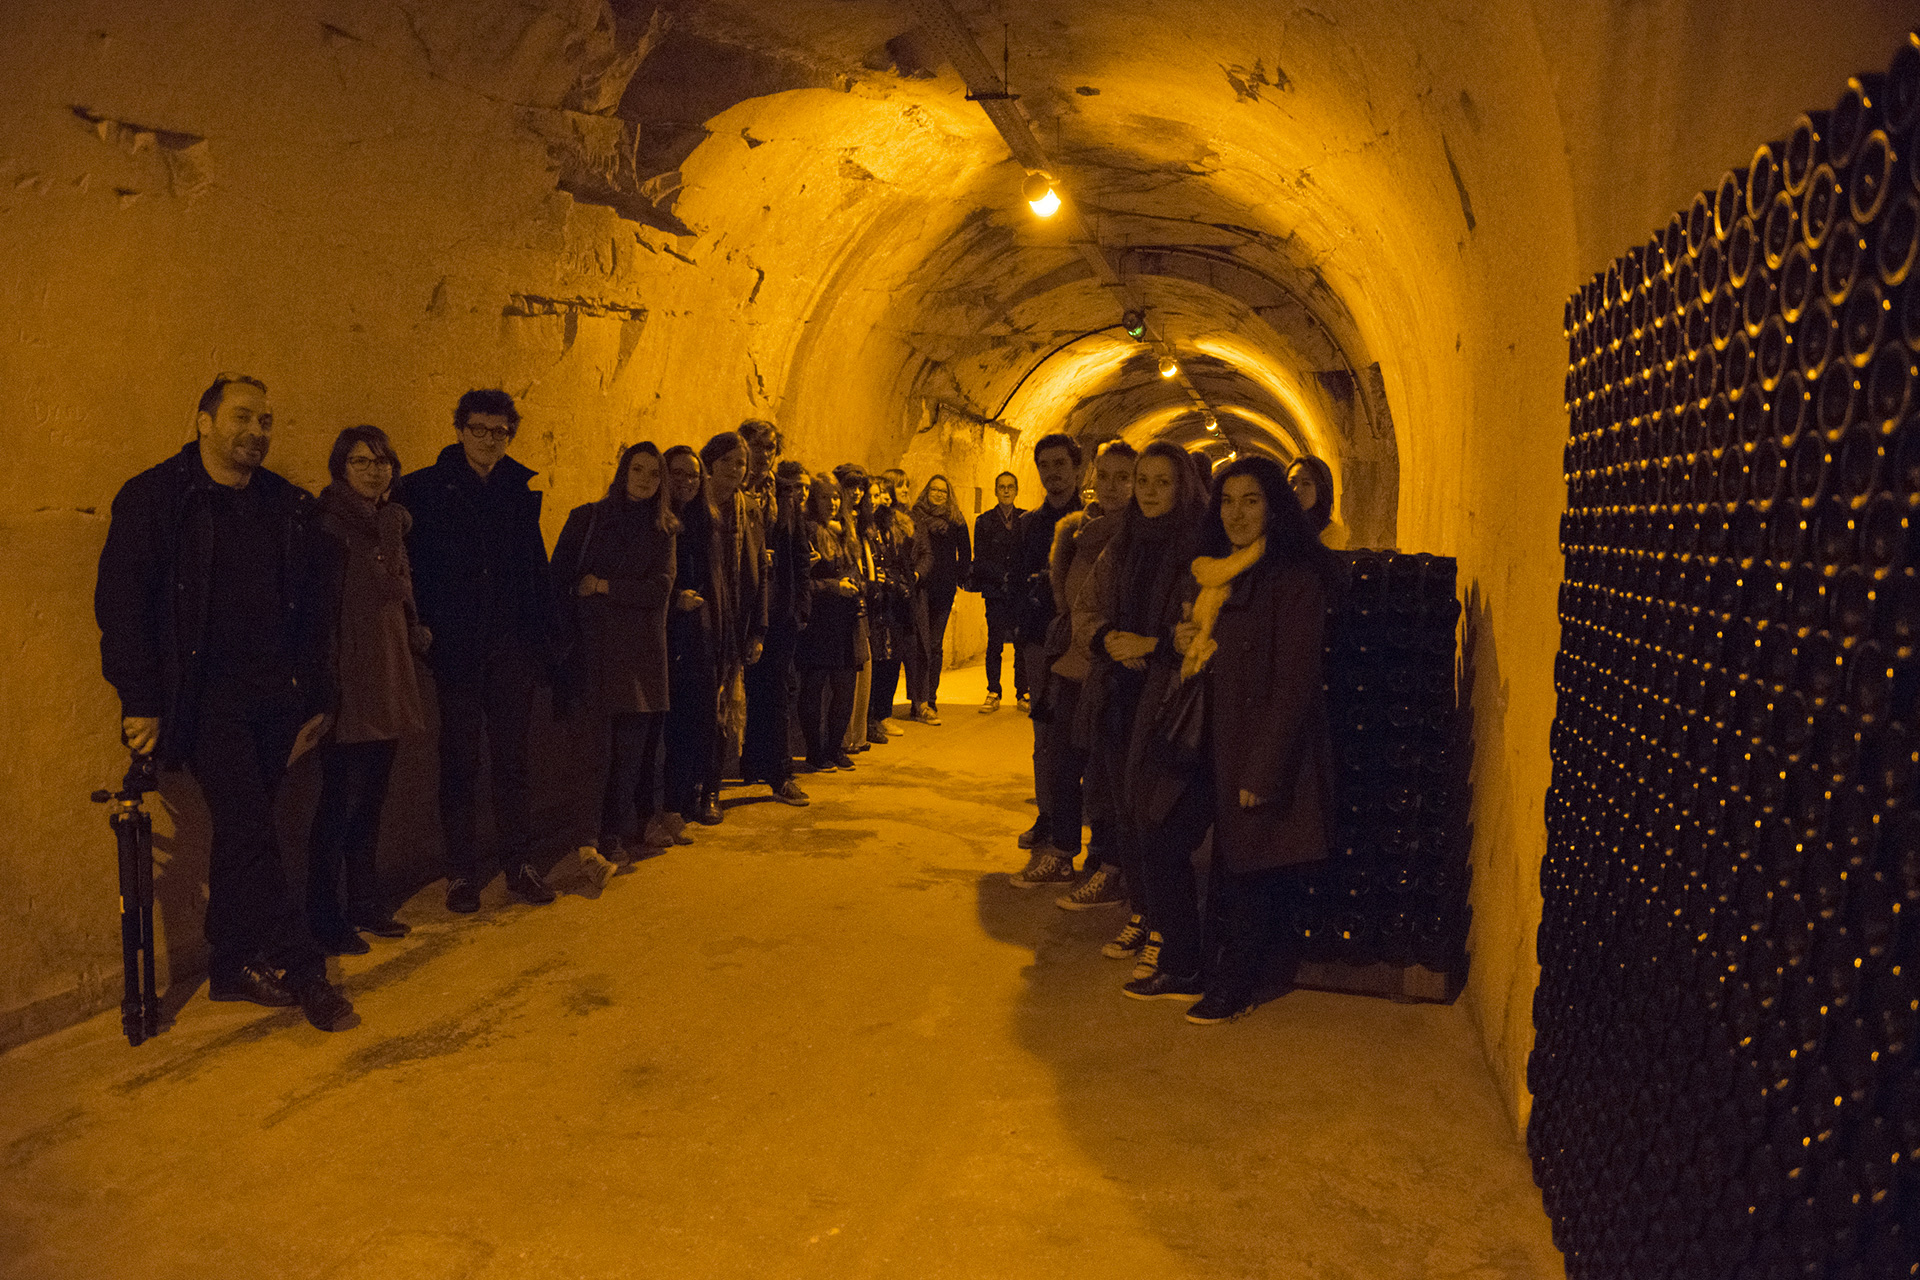 aire_food_taittinger_assemblage_caves_reims_champagne_groupe